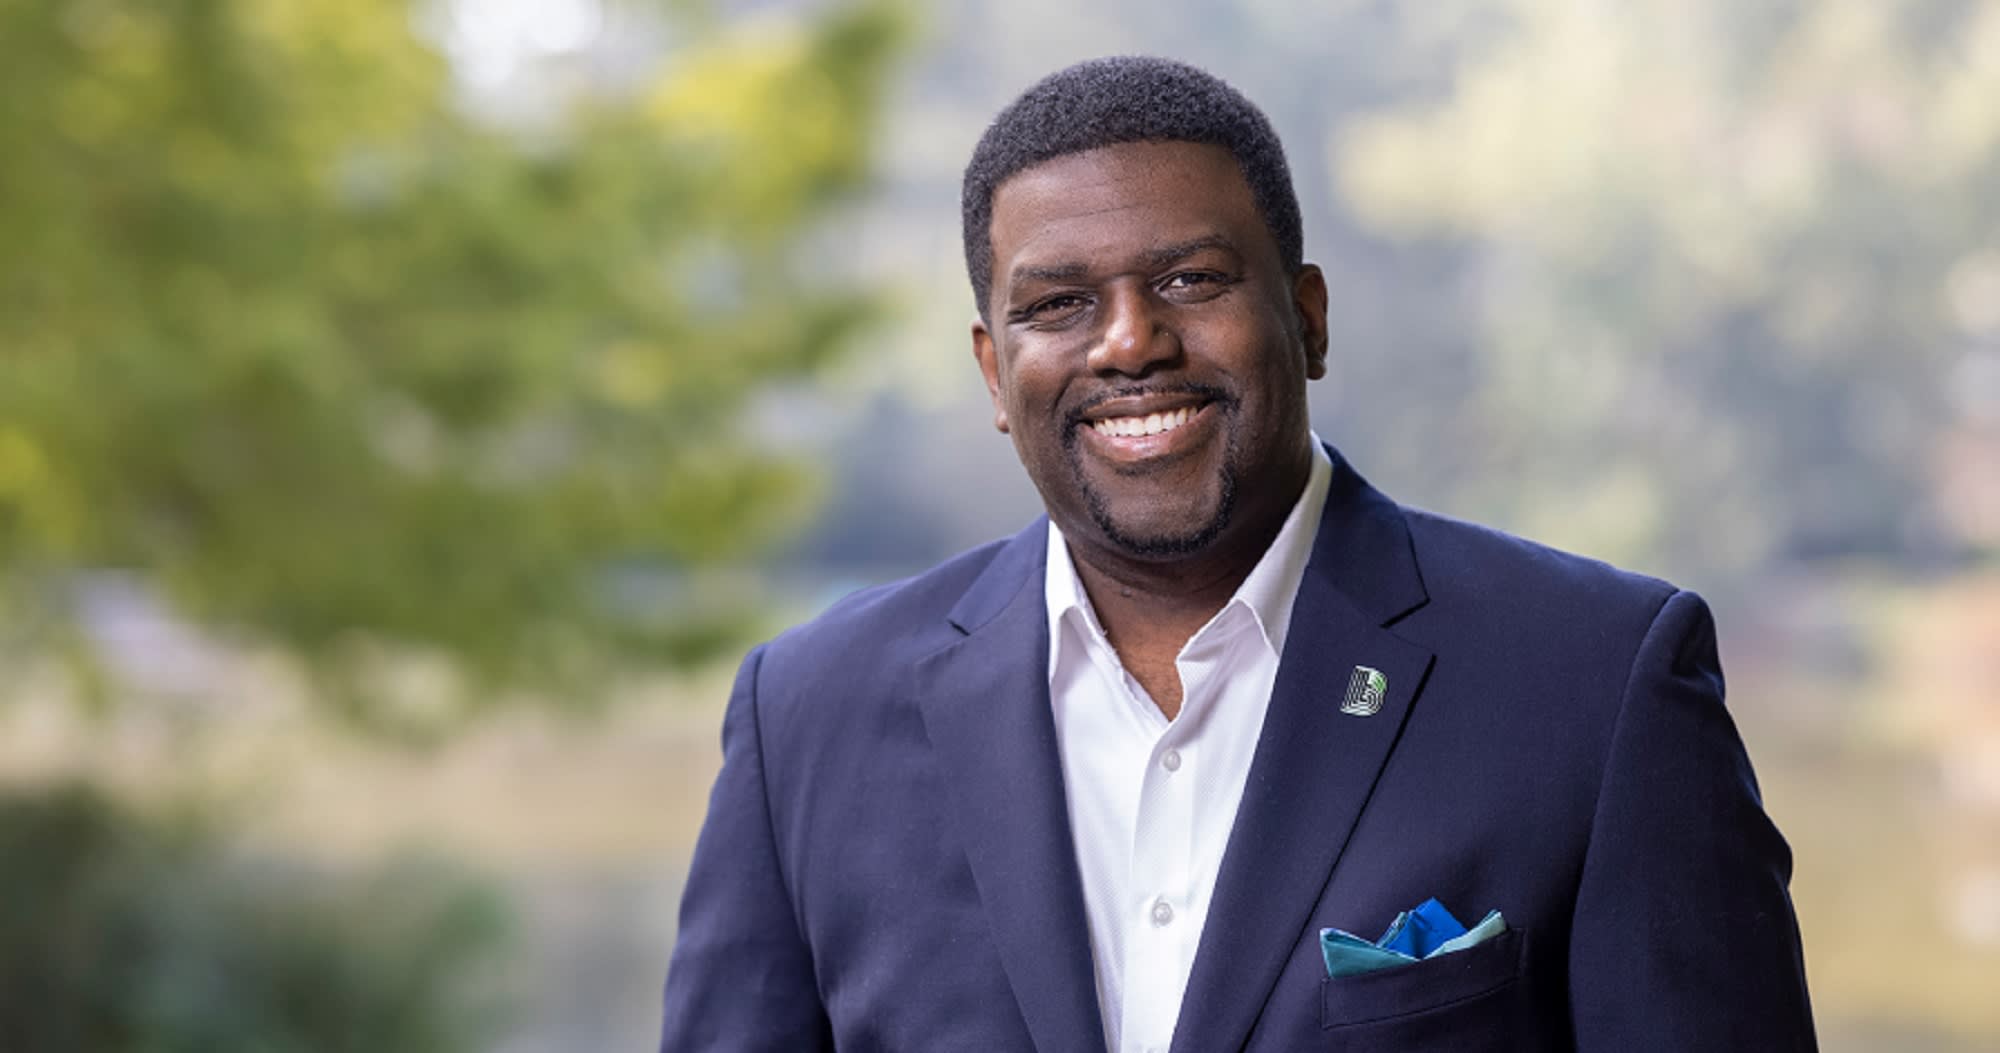 Artis Stevens: First Black CEO of Big Brothers Big Sisters of America